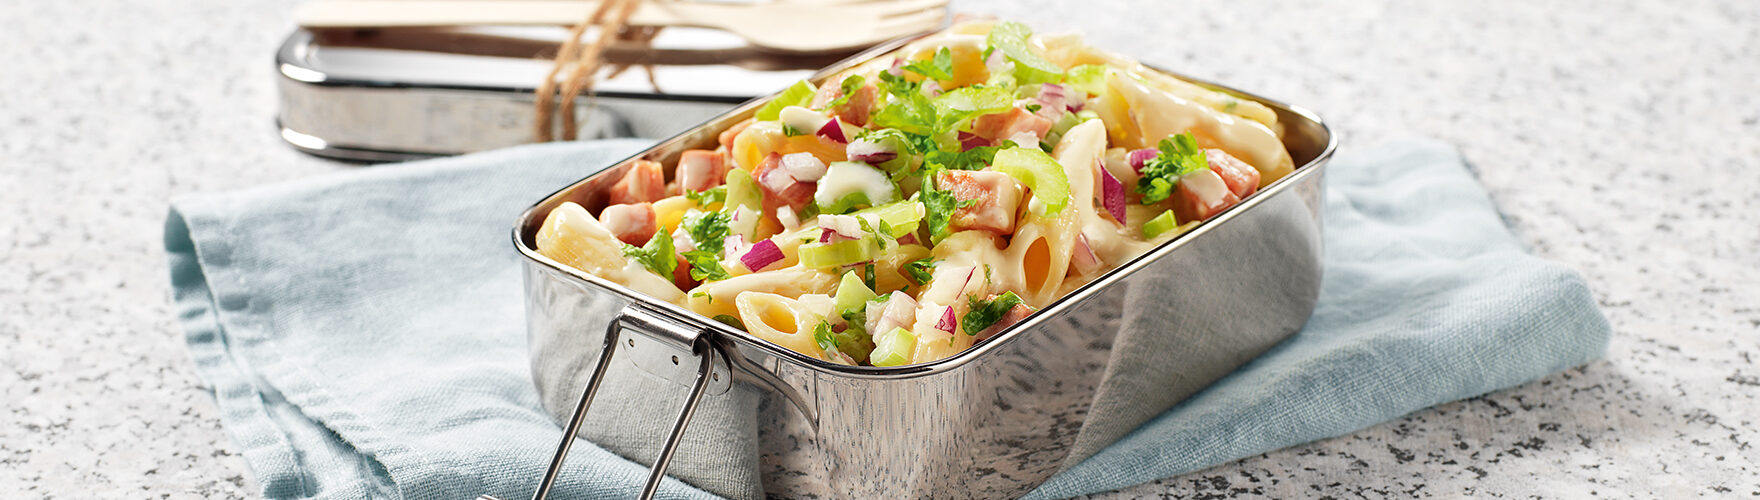 Pasta salad with diced ham, red onion and celery